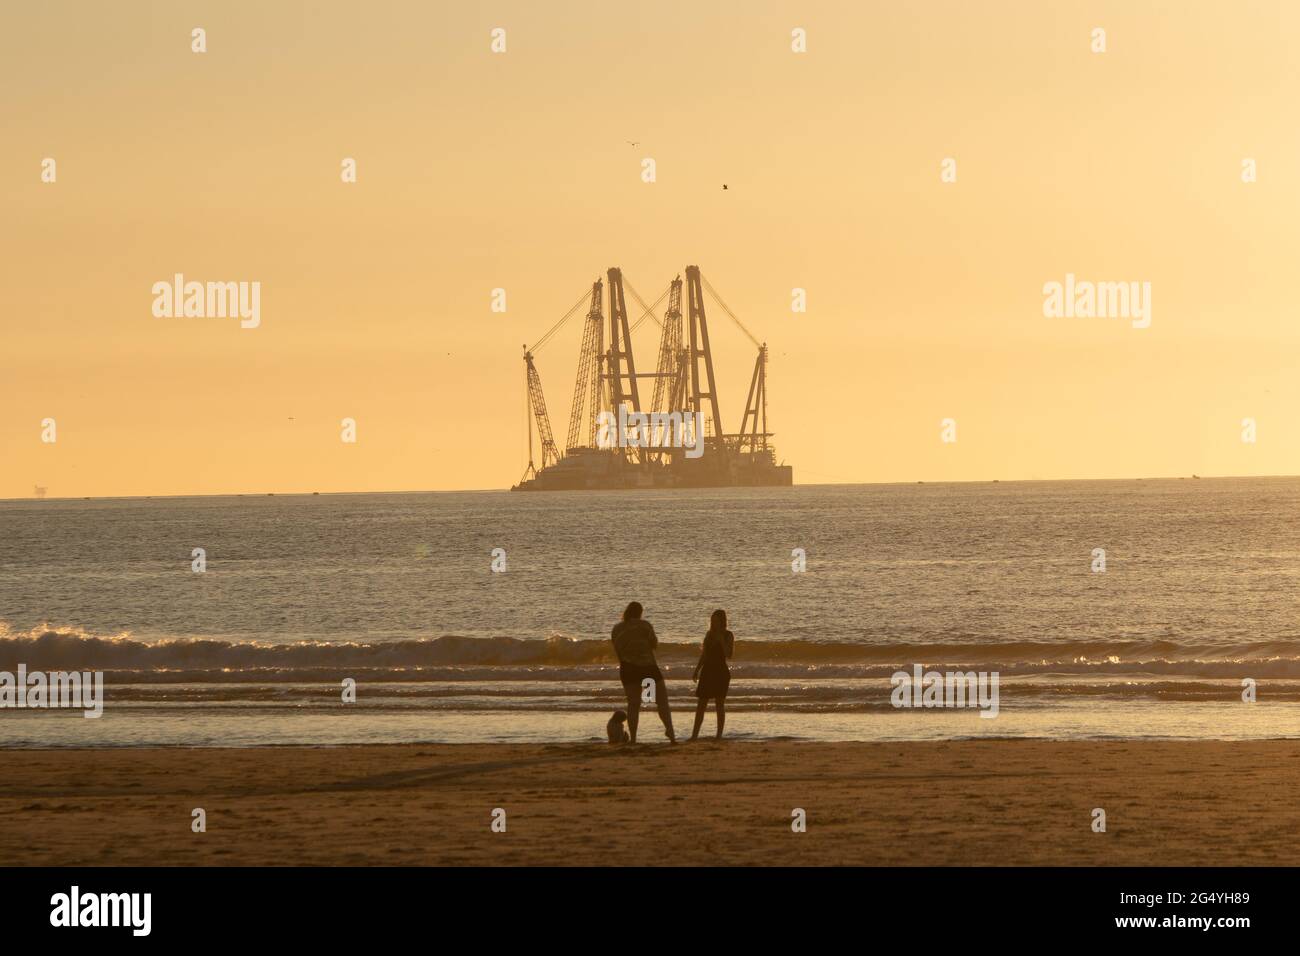 Kijkduin beach, The Hague, The Netherlands - June 13 2021: Heavy industry wind turbine installation barge off the Dutch coast, building an offshore wi Stock Photo